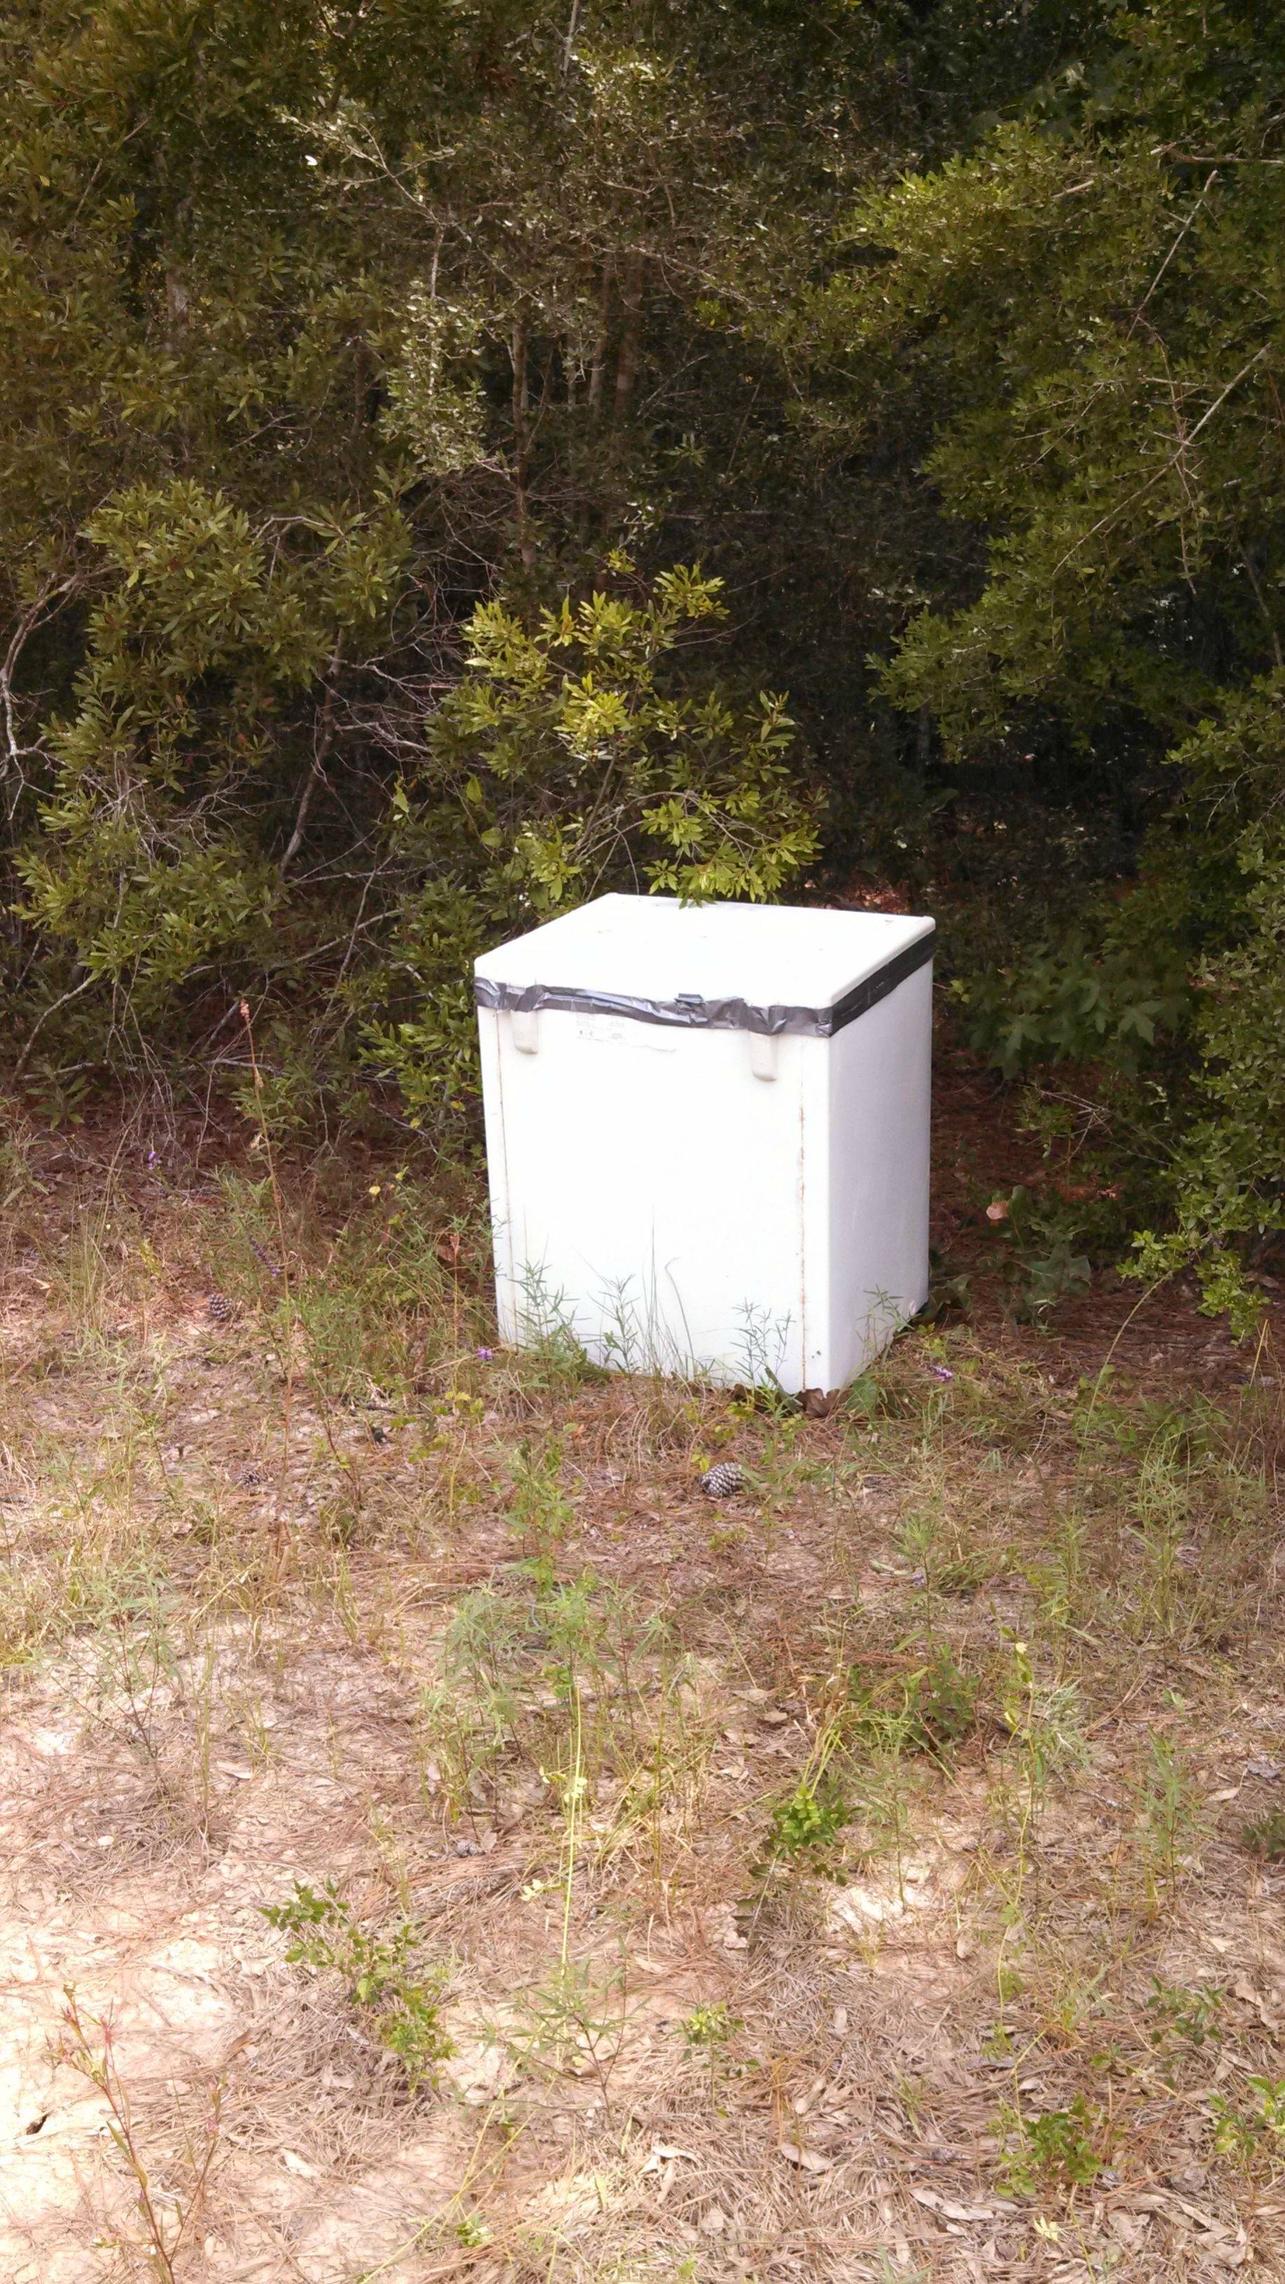 What would you do if you found a freezer taped up in the woods?